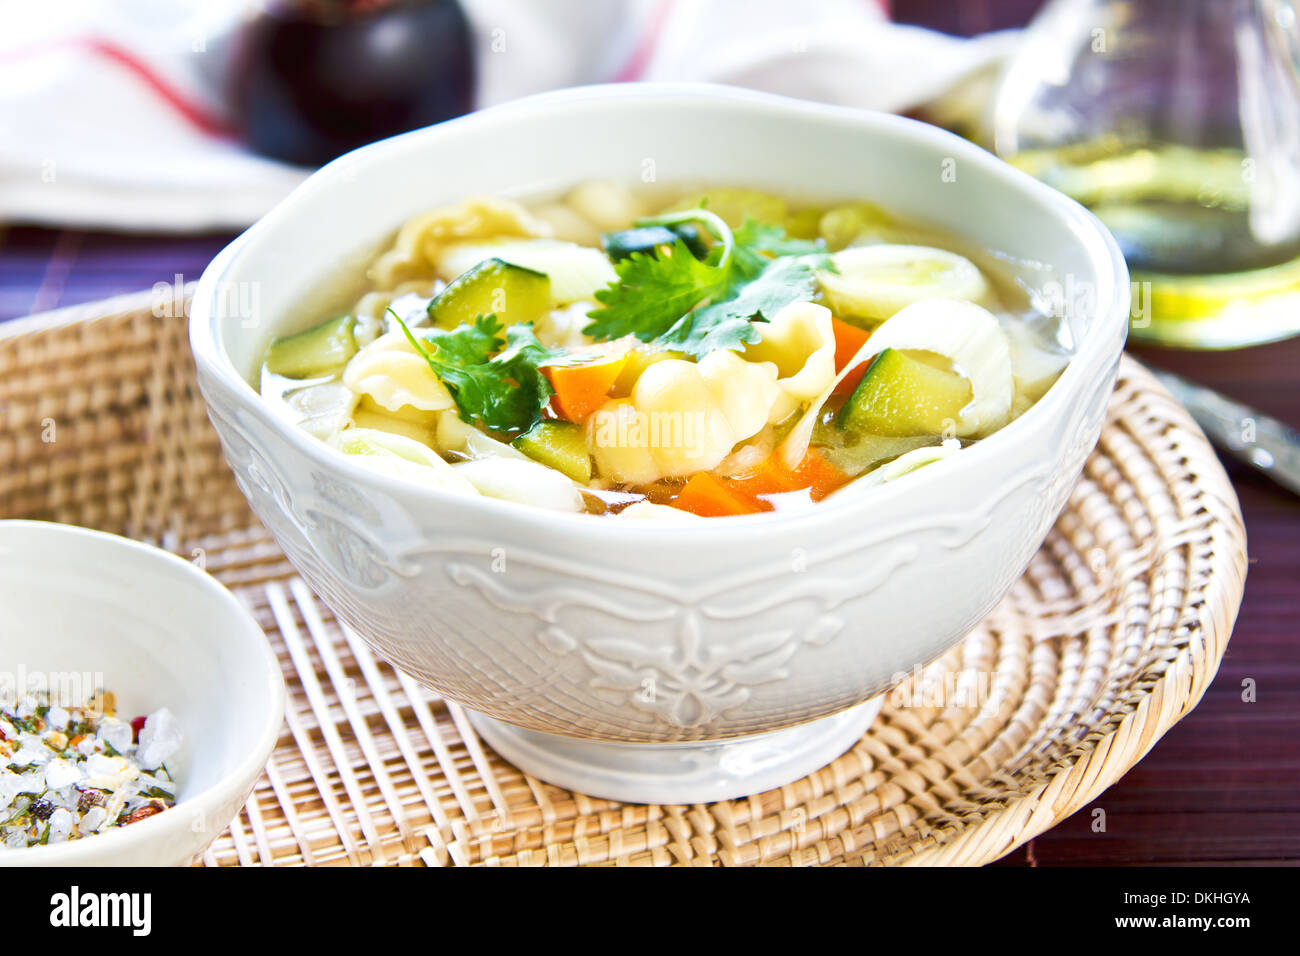 Leek with Celery,Zucchini and Carrot soup with pasta Stock Photo